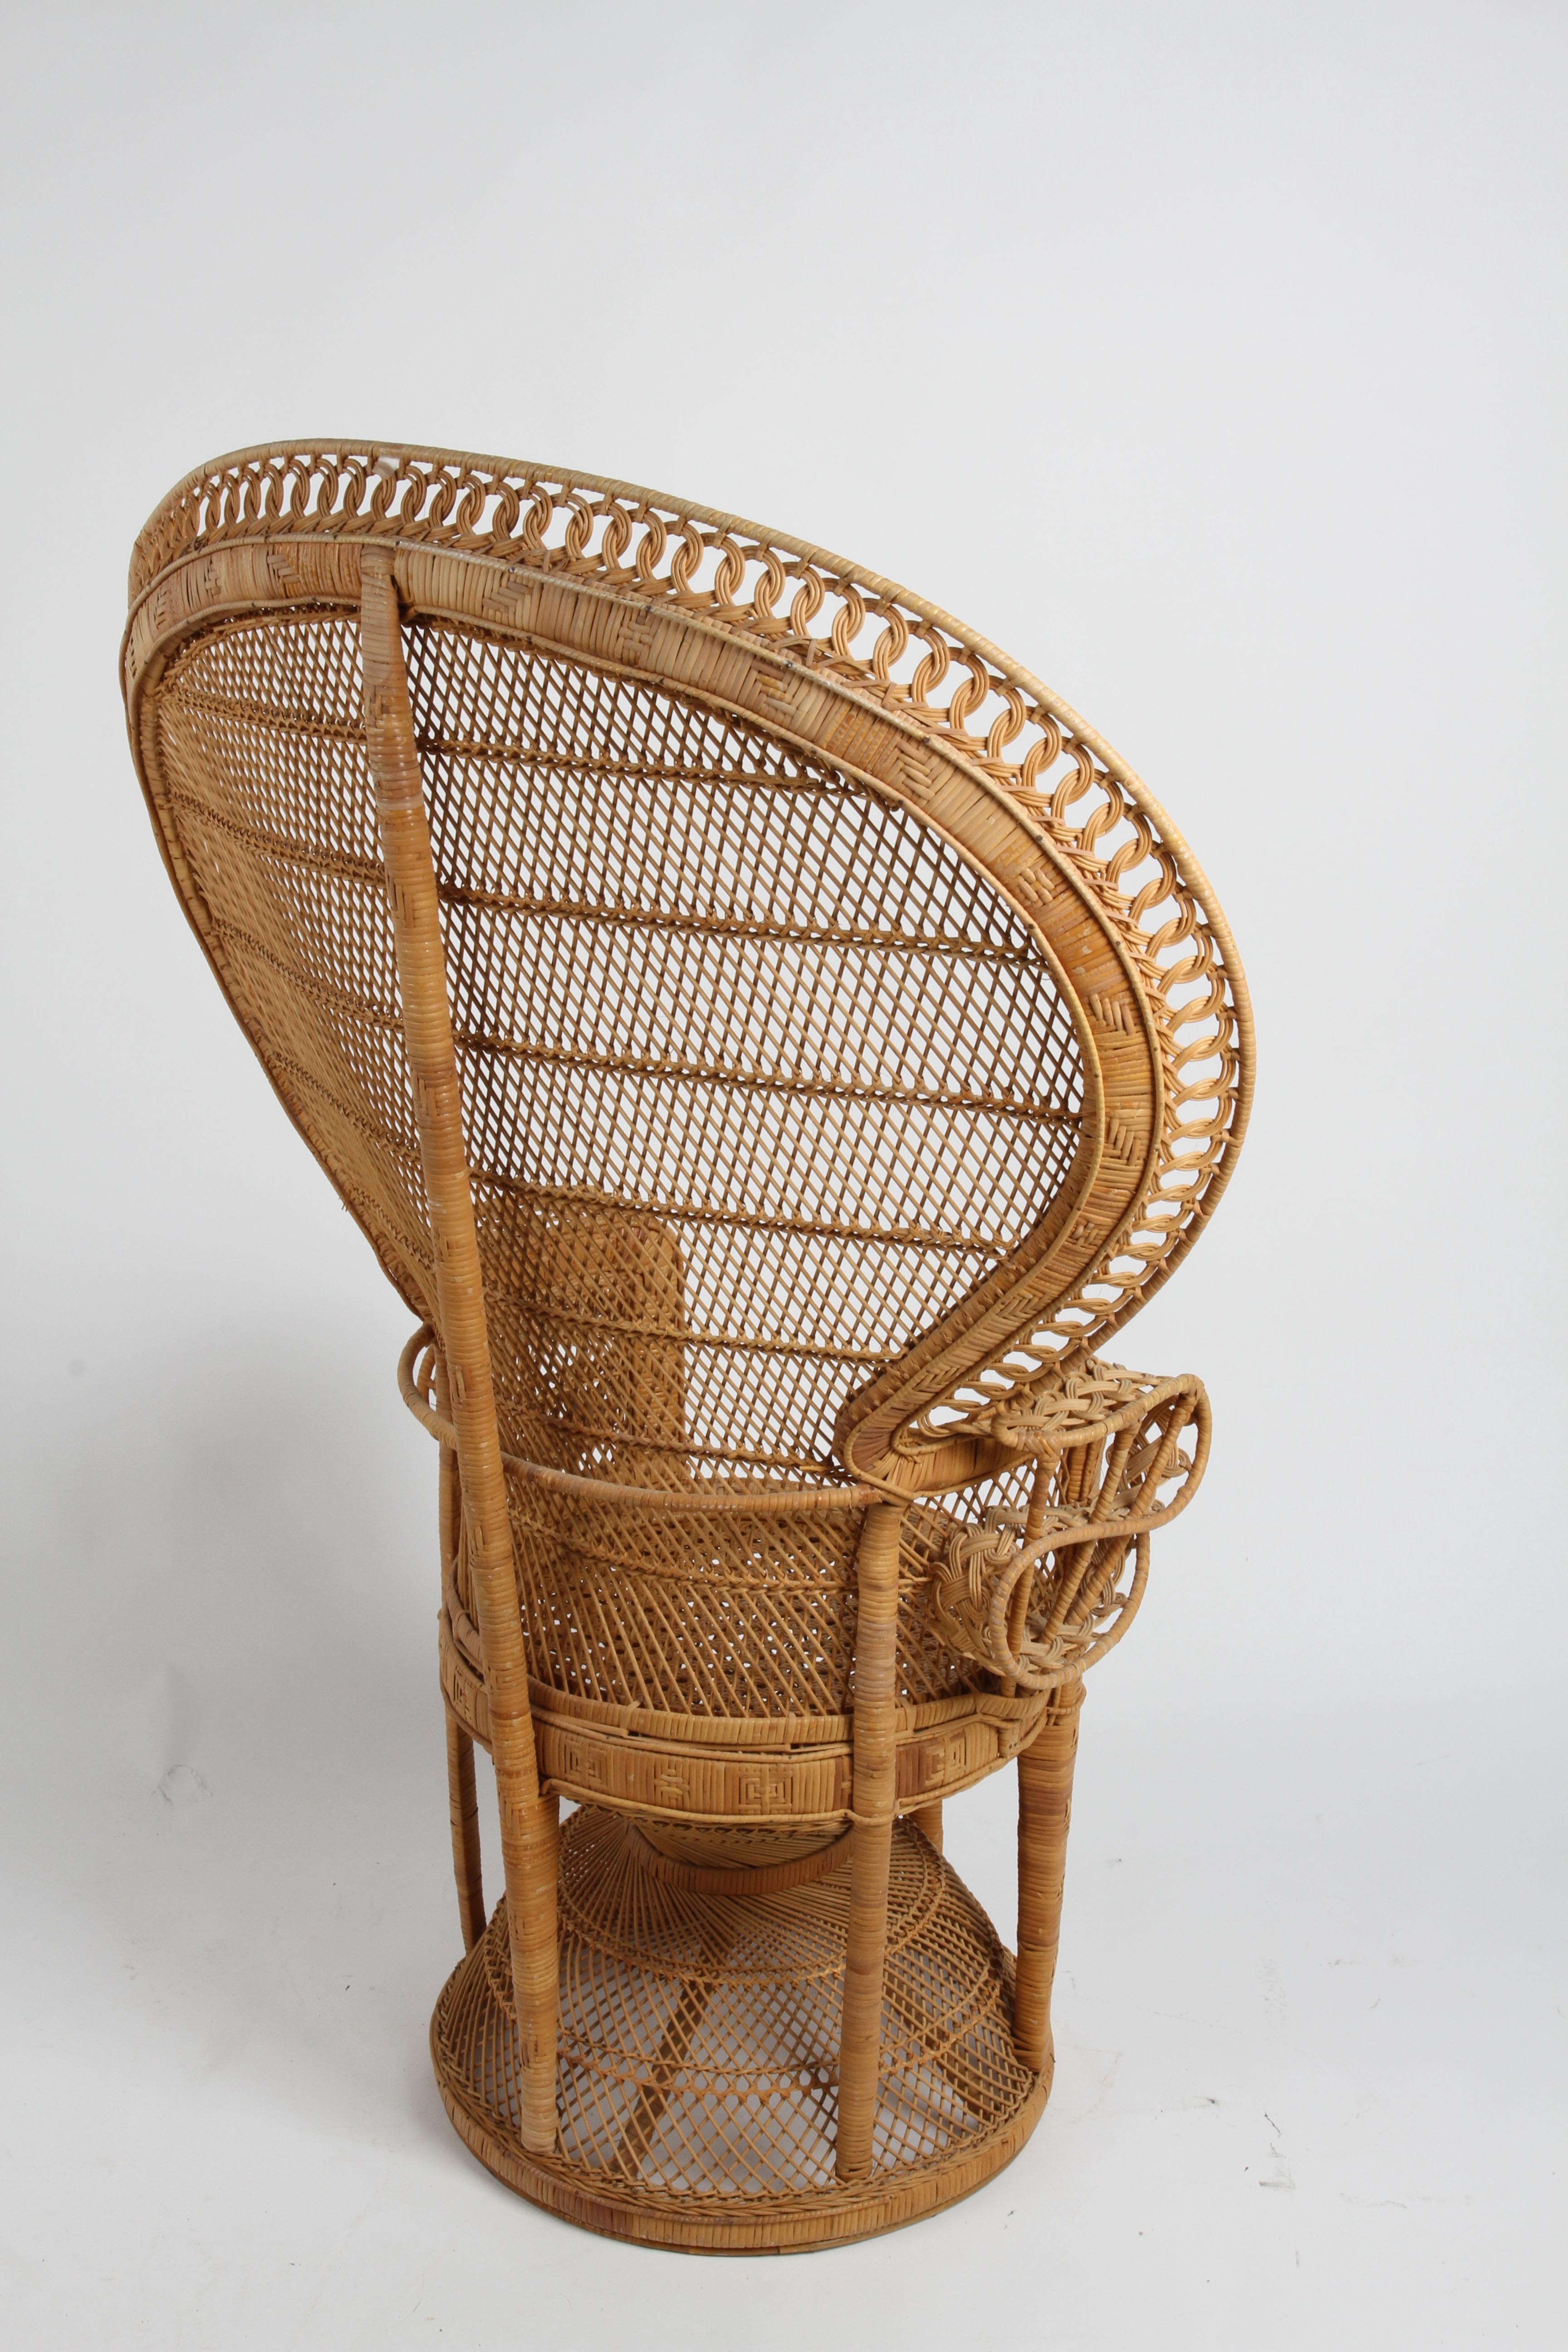 Vintage 1970s Rattan & Wicker Handcrafted Boho Chic Emmanuelle Peacock Chair 4